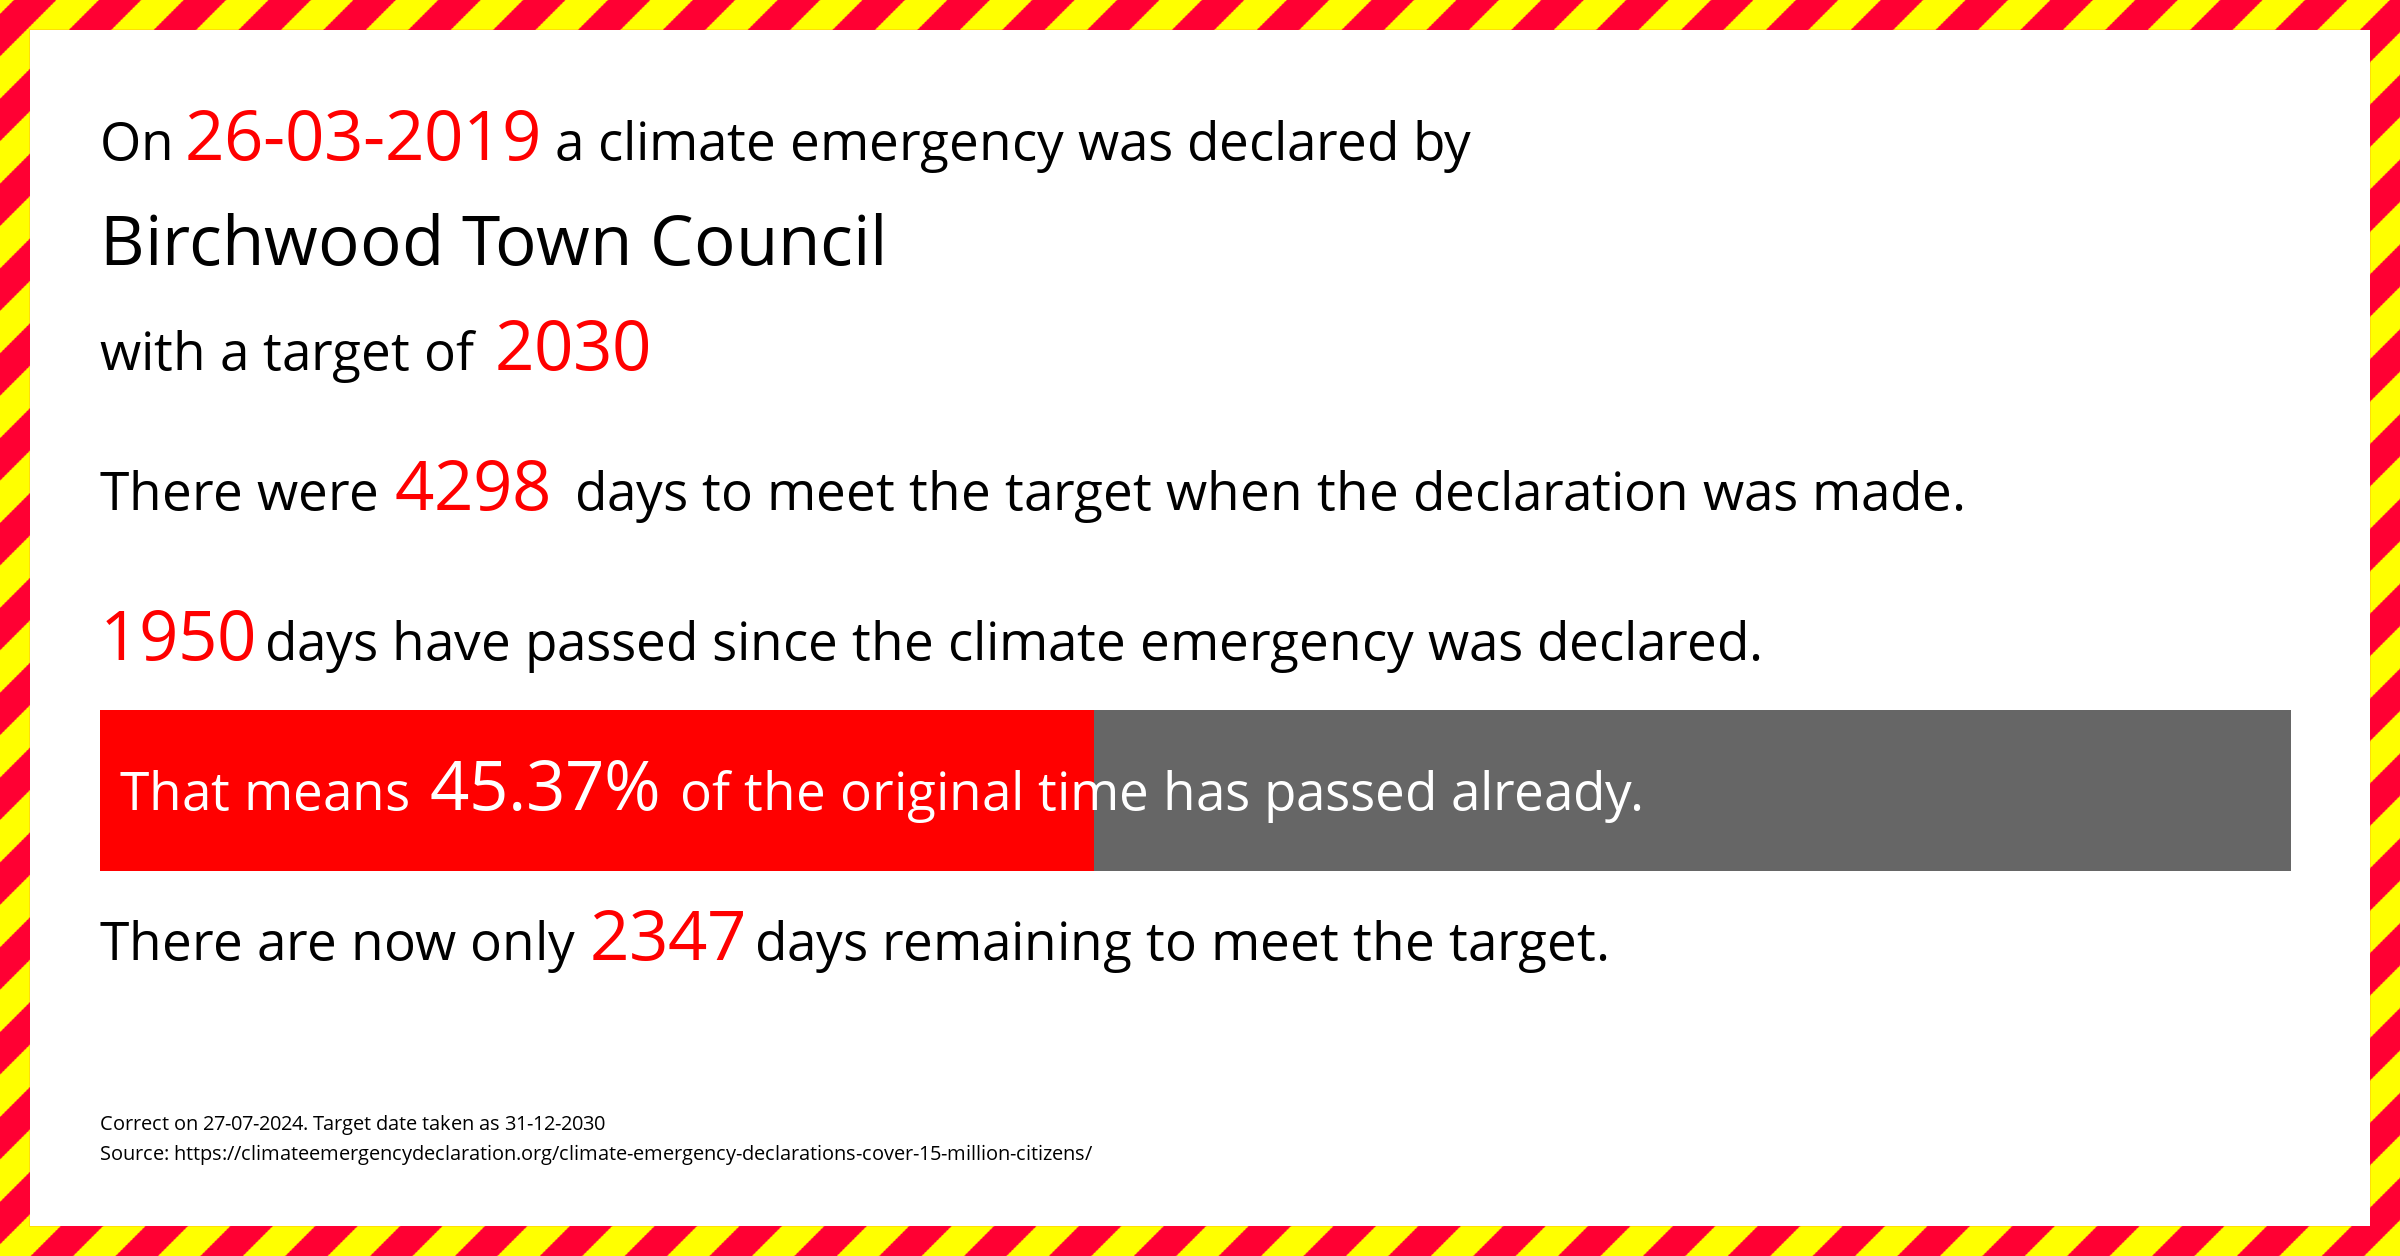 Birchwood Town Council declared a Climate emergency on Tuesday 26th March 2019, with a target of 2030.